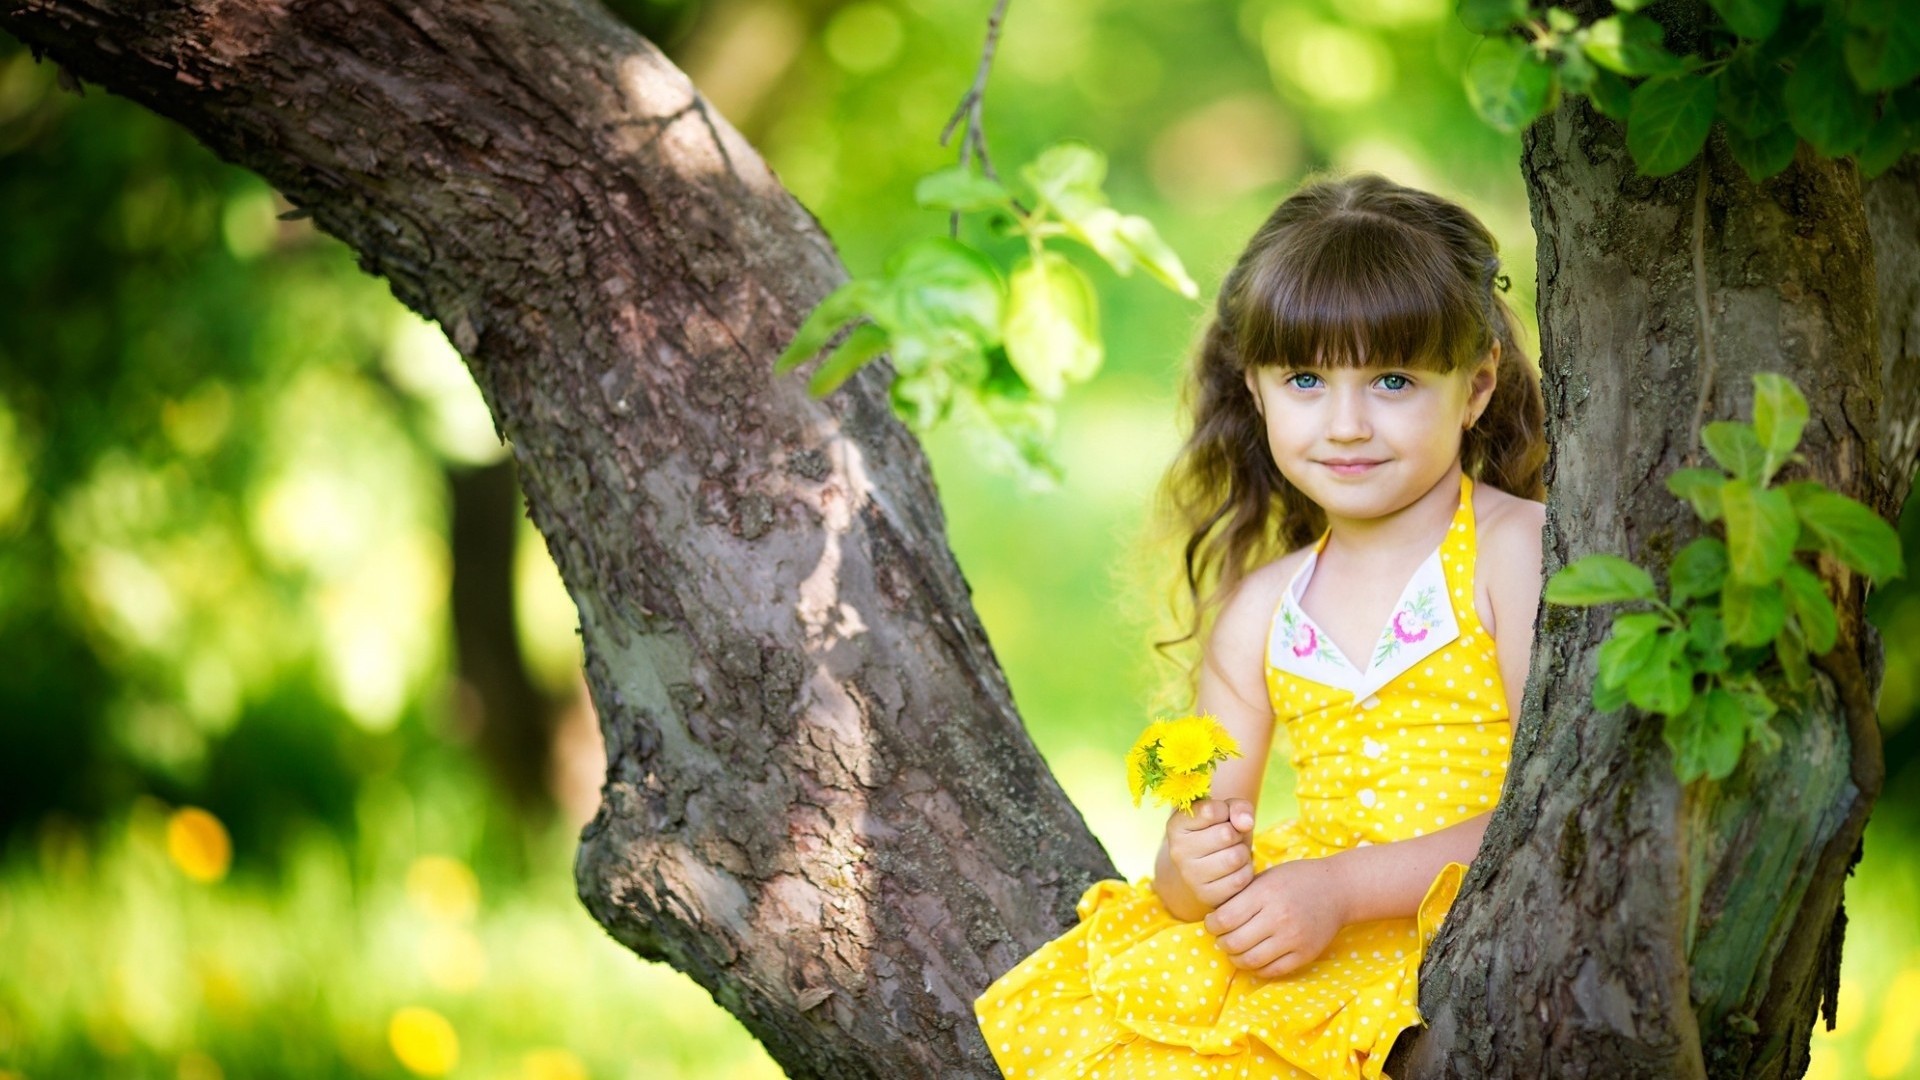 1920x1080 Find out: Lovely Girl in Yellow Dress wallpaper on http://hdpicorner.